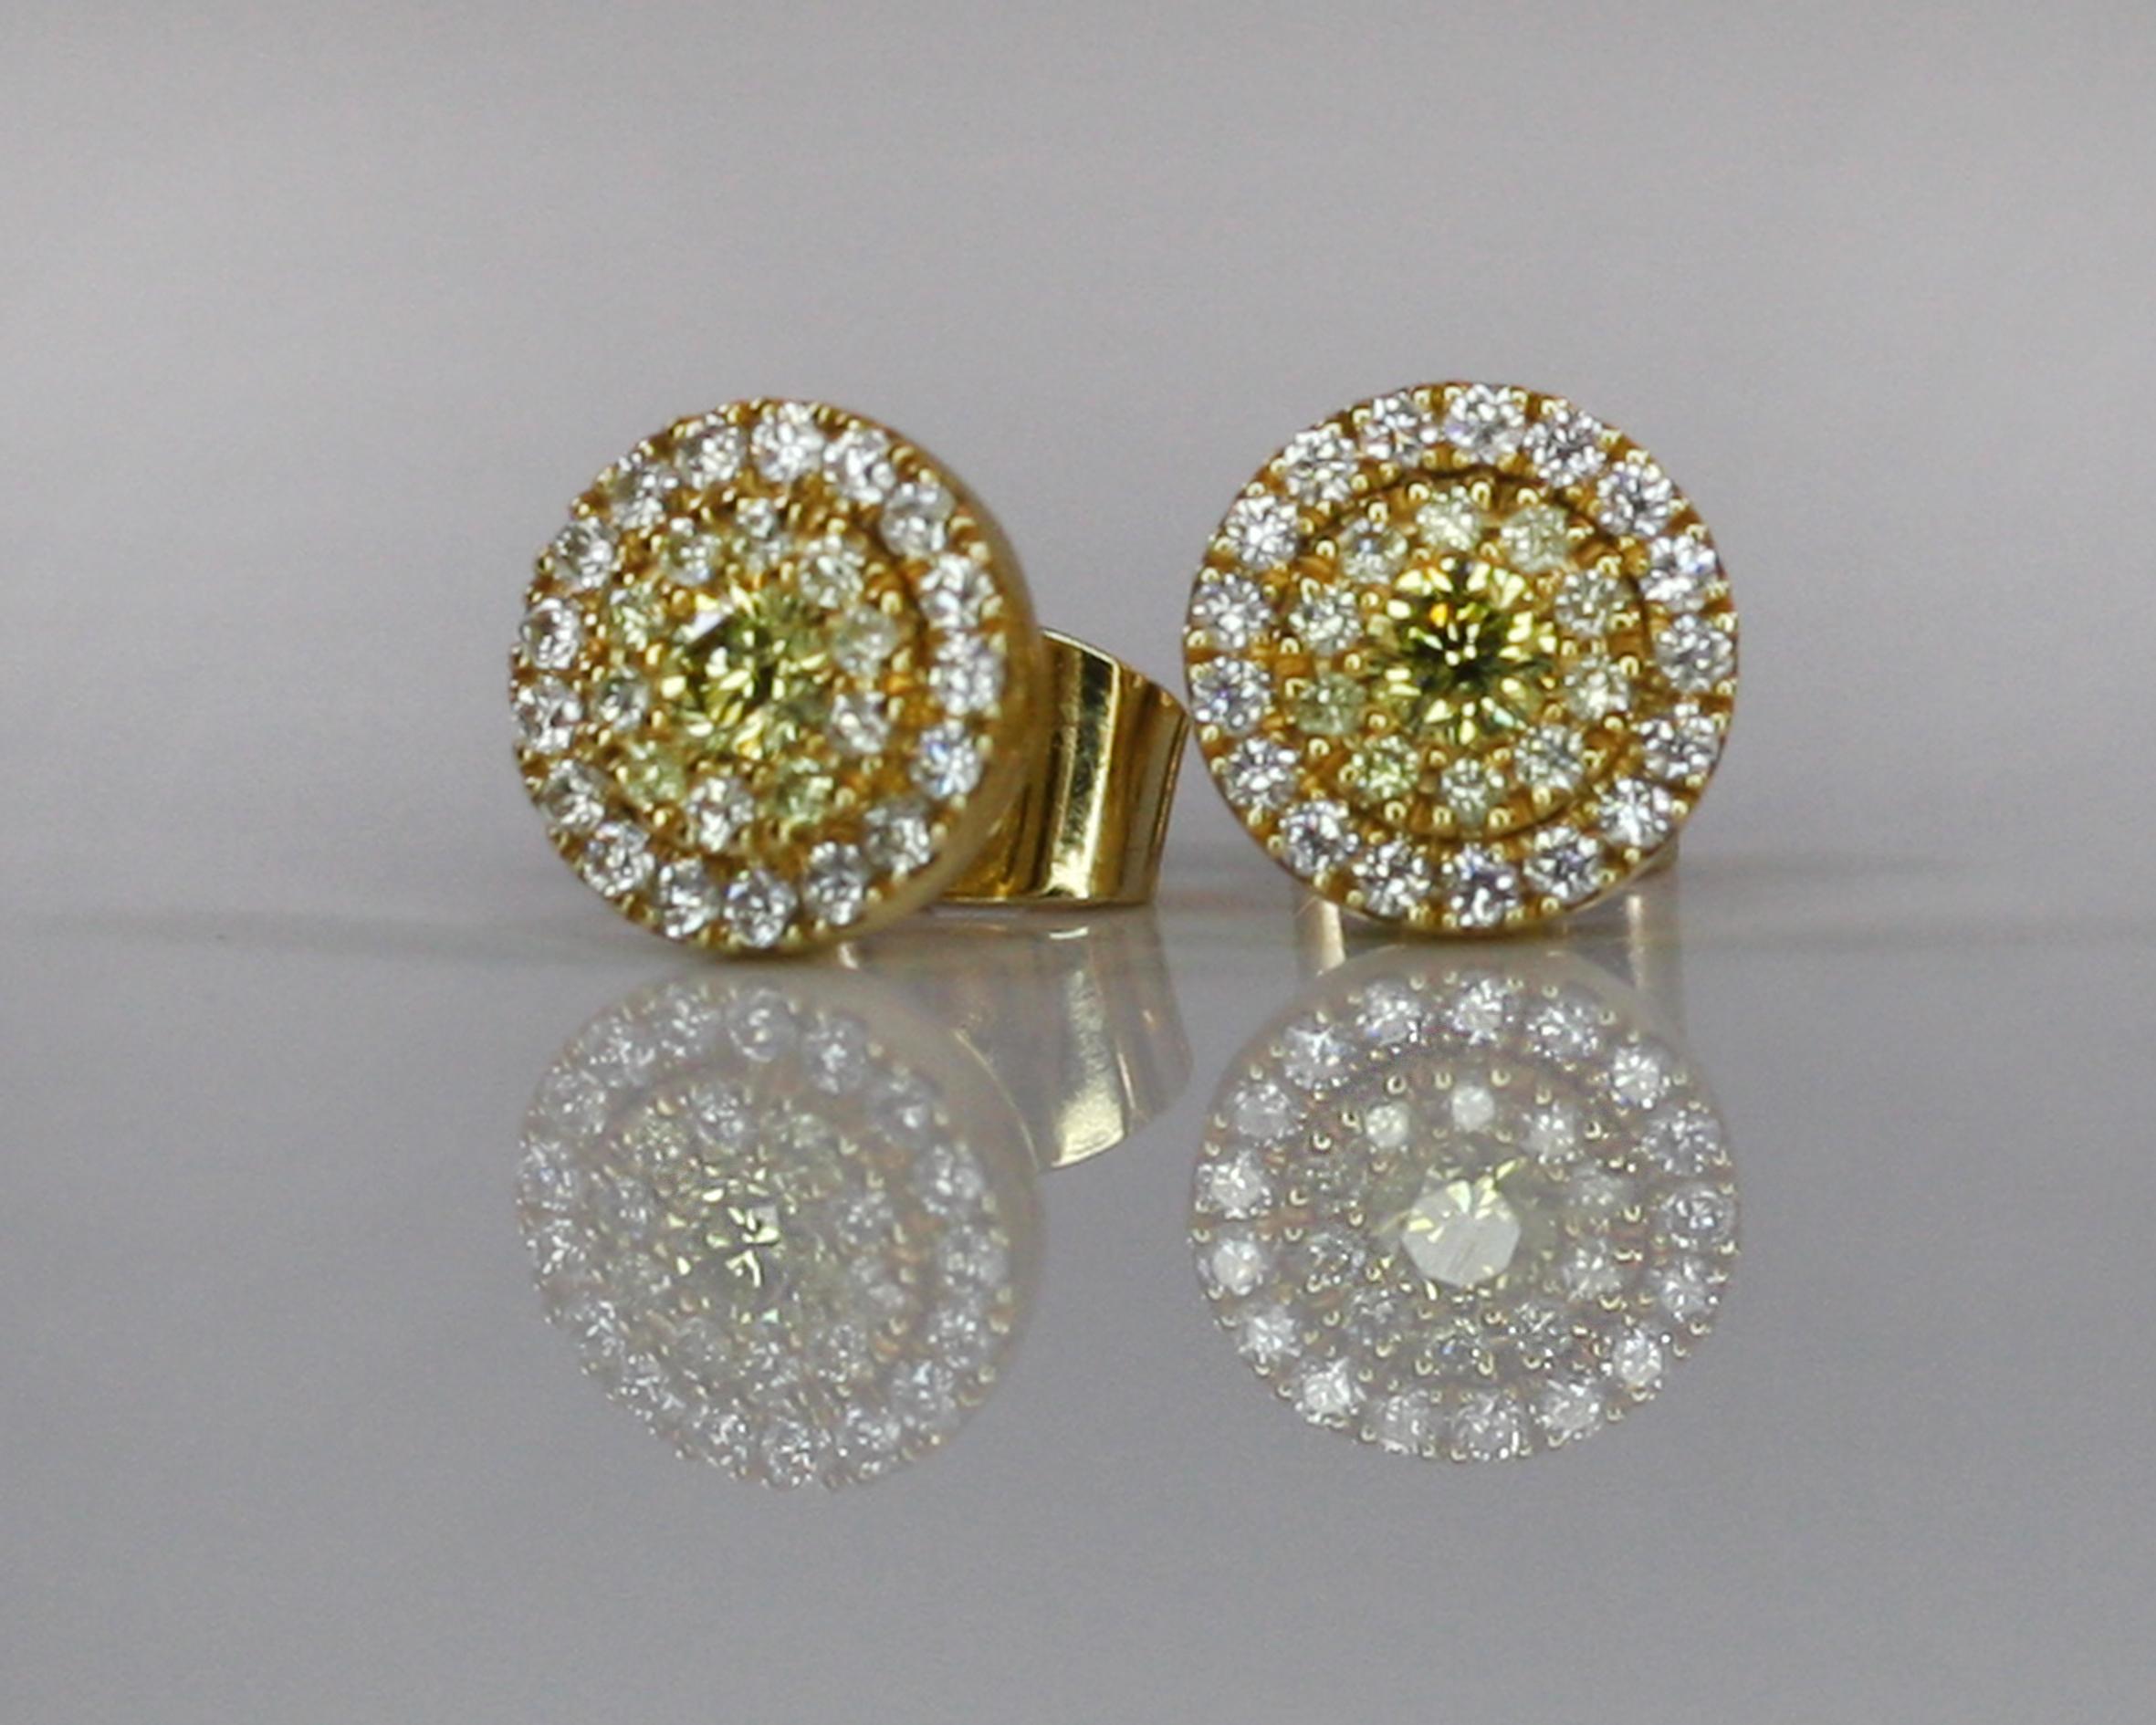 Brilliant Cut Georgios Collections 18 Karat Gold Stud Earrings with White and Yellow Diamonds For Sale